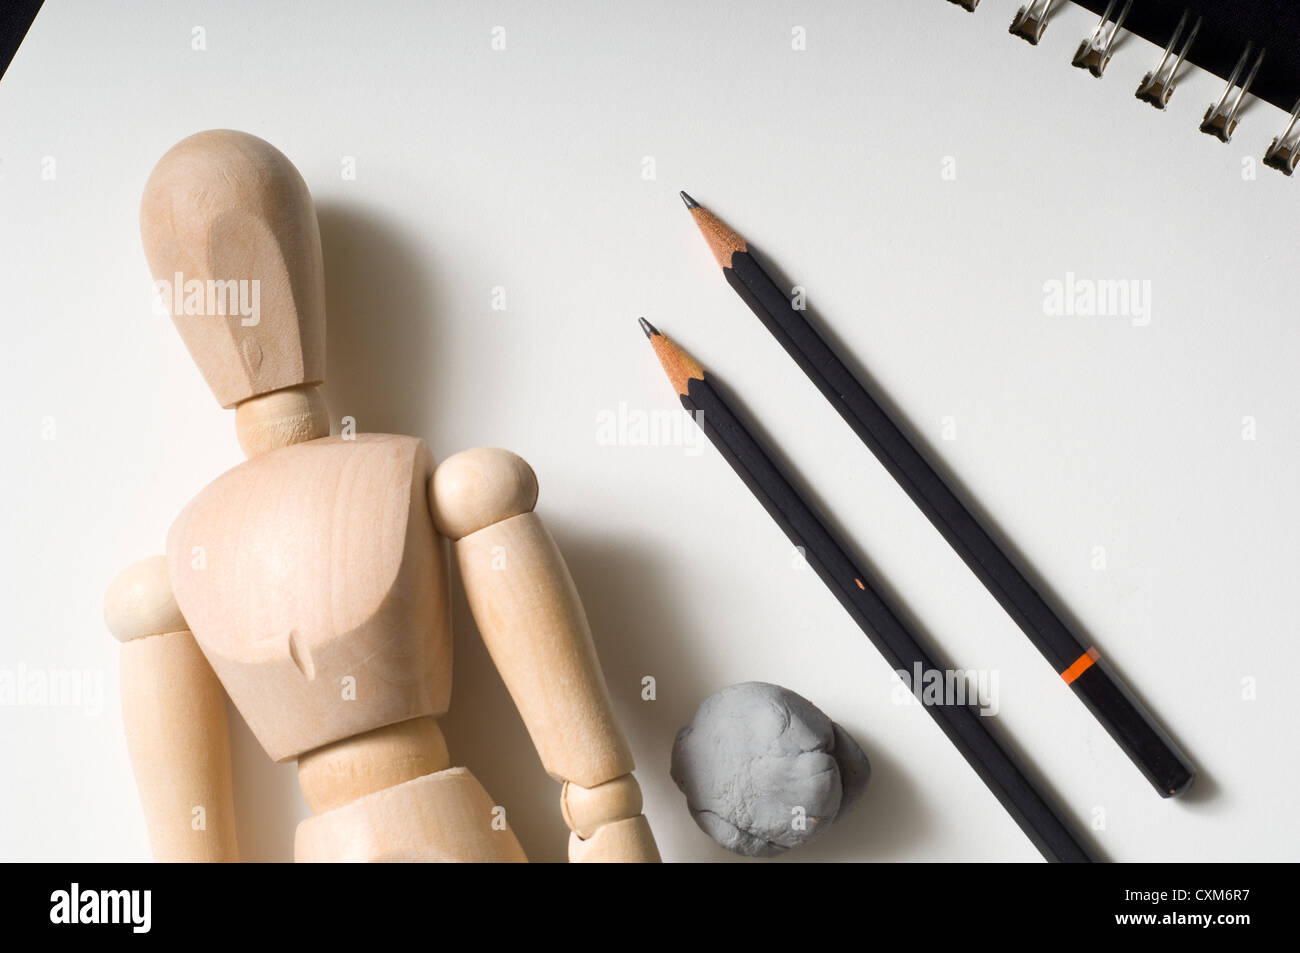 A drawers tools including a wooden people poser, pencils, eraser on a sketch tablet Stock Photo